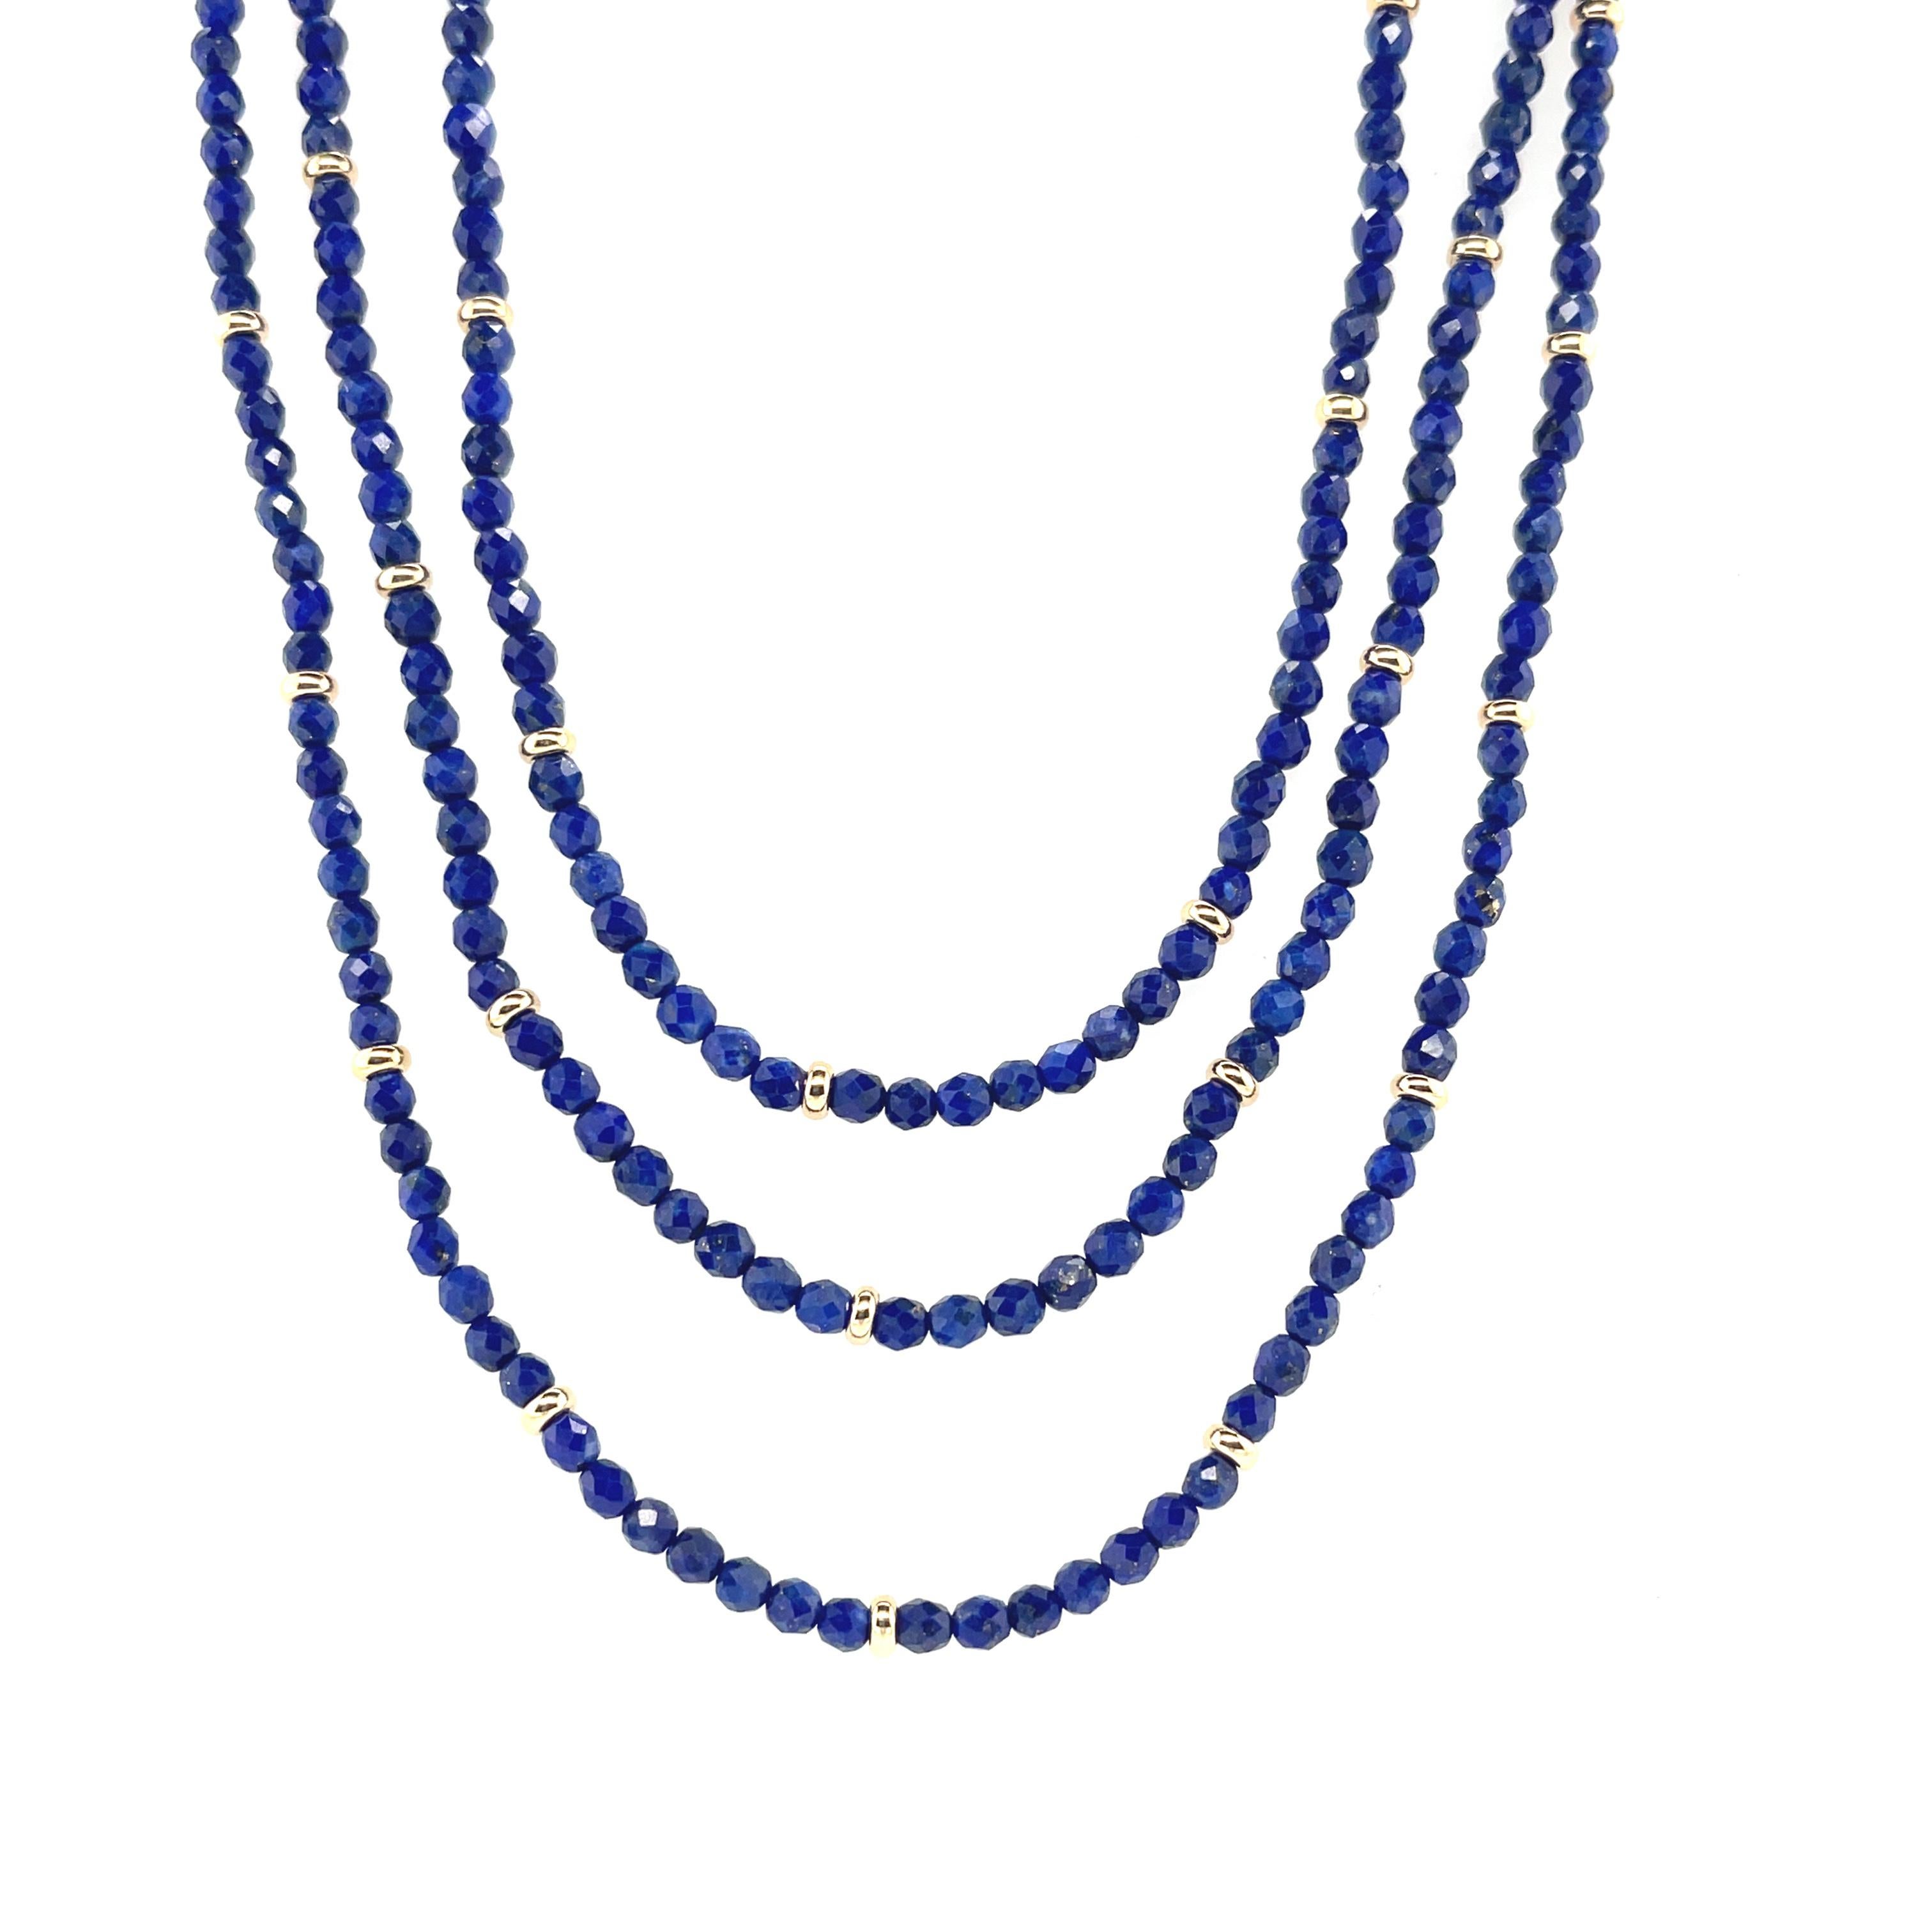 Bring understated elegance to any outfit with this strand of sparkling faceted lapis lazuli beads! The lapis beads in this necklace have wonderfully rich, royal blue color, with facets that sparkle in the light and are complemented beautifully with